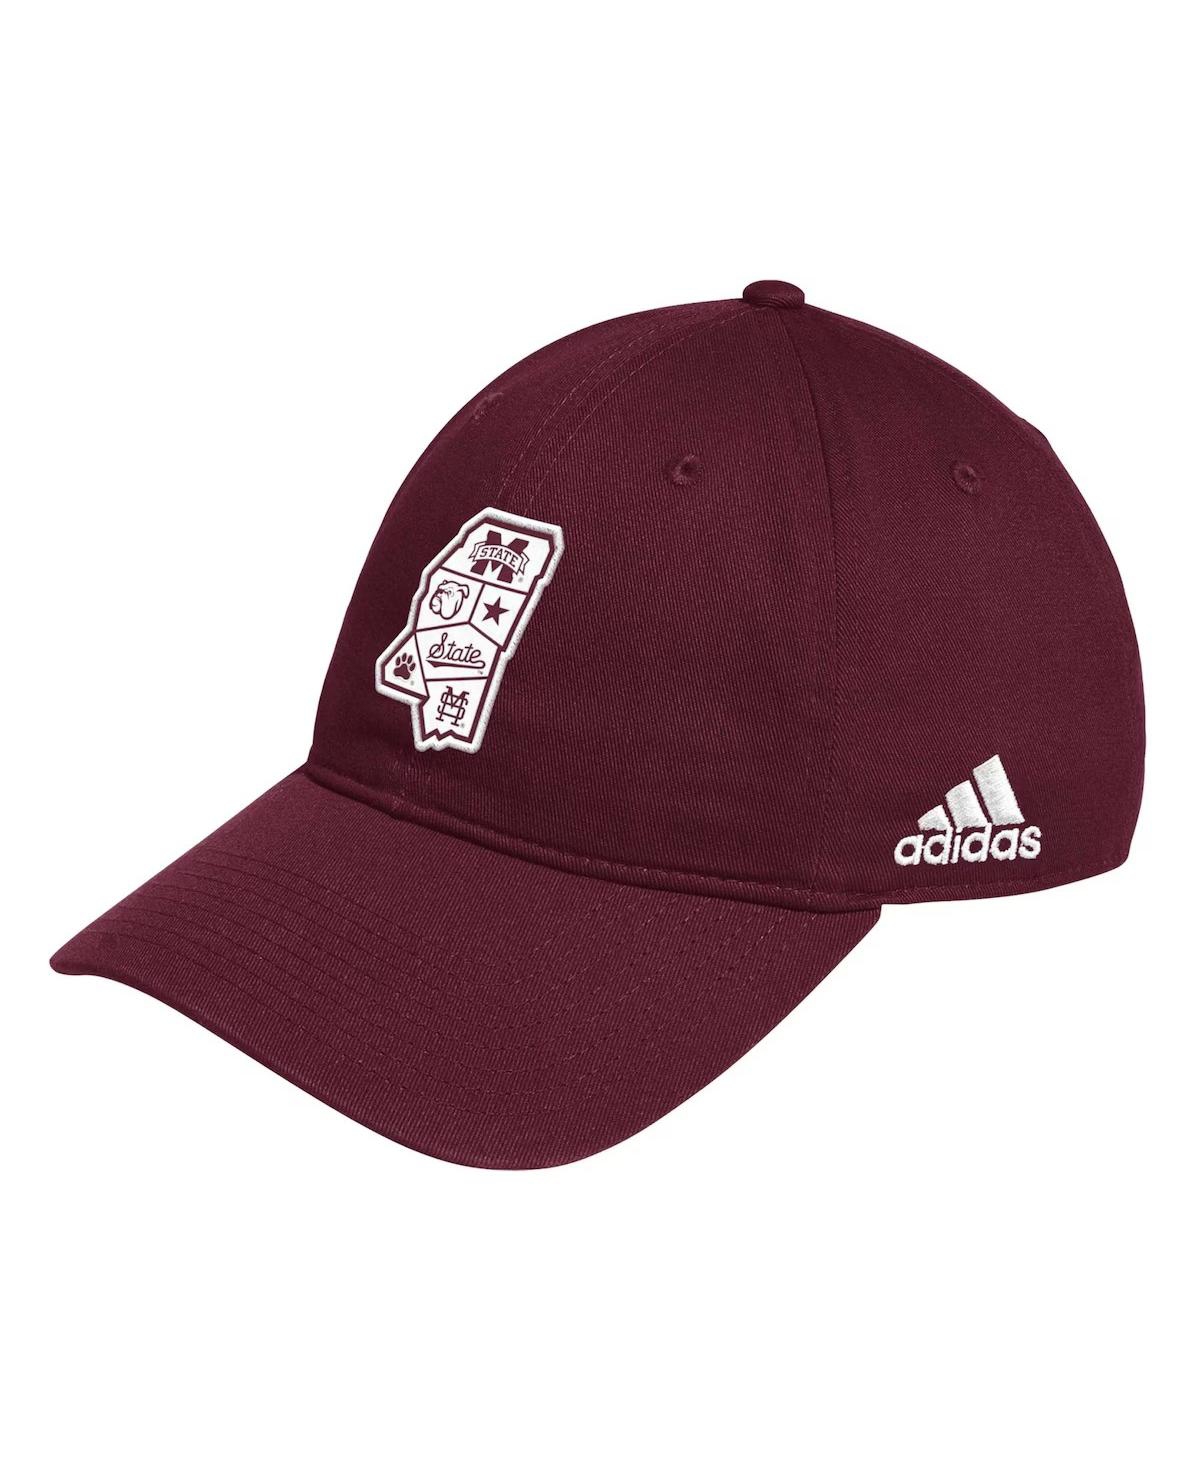 Adidas Originals Men's Maroon Mississippi State Bulldogs State Slouch Adjustable Hat In Burgundy